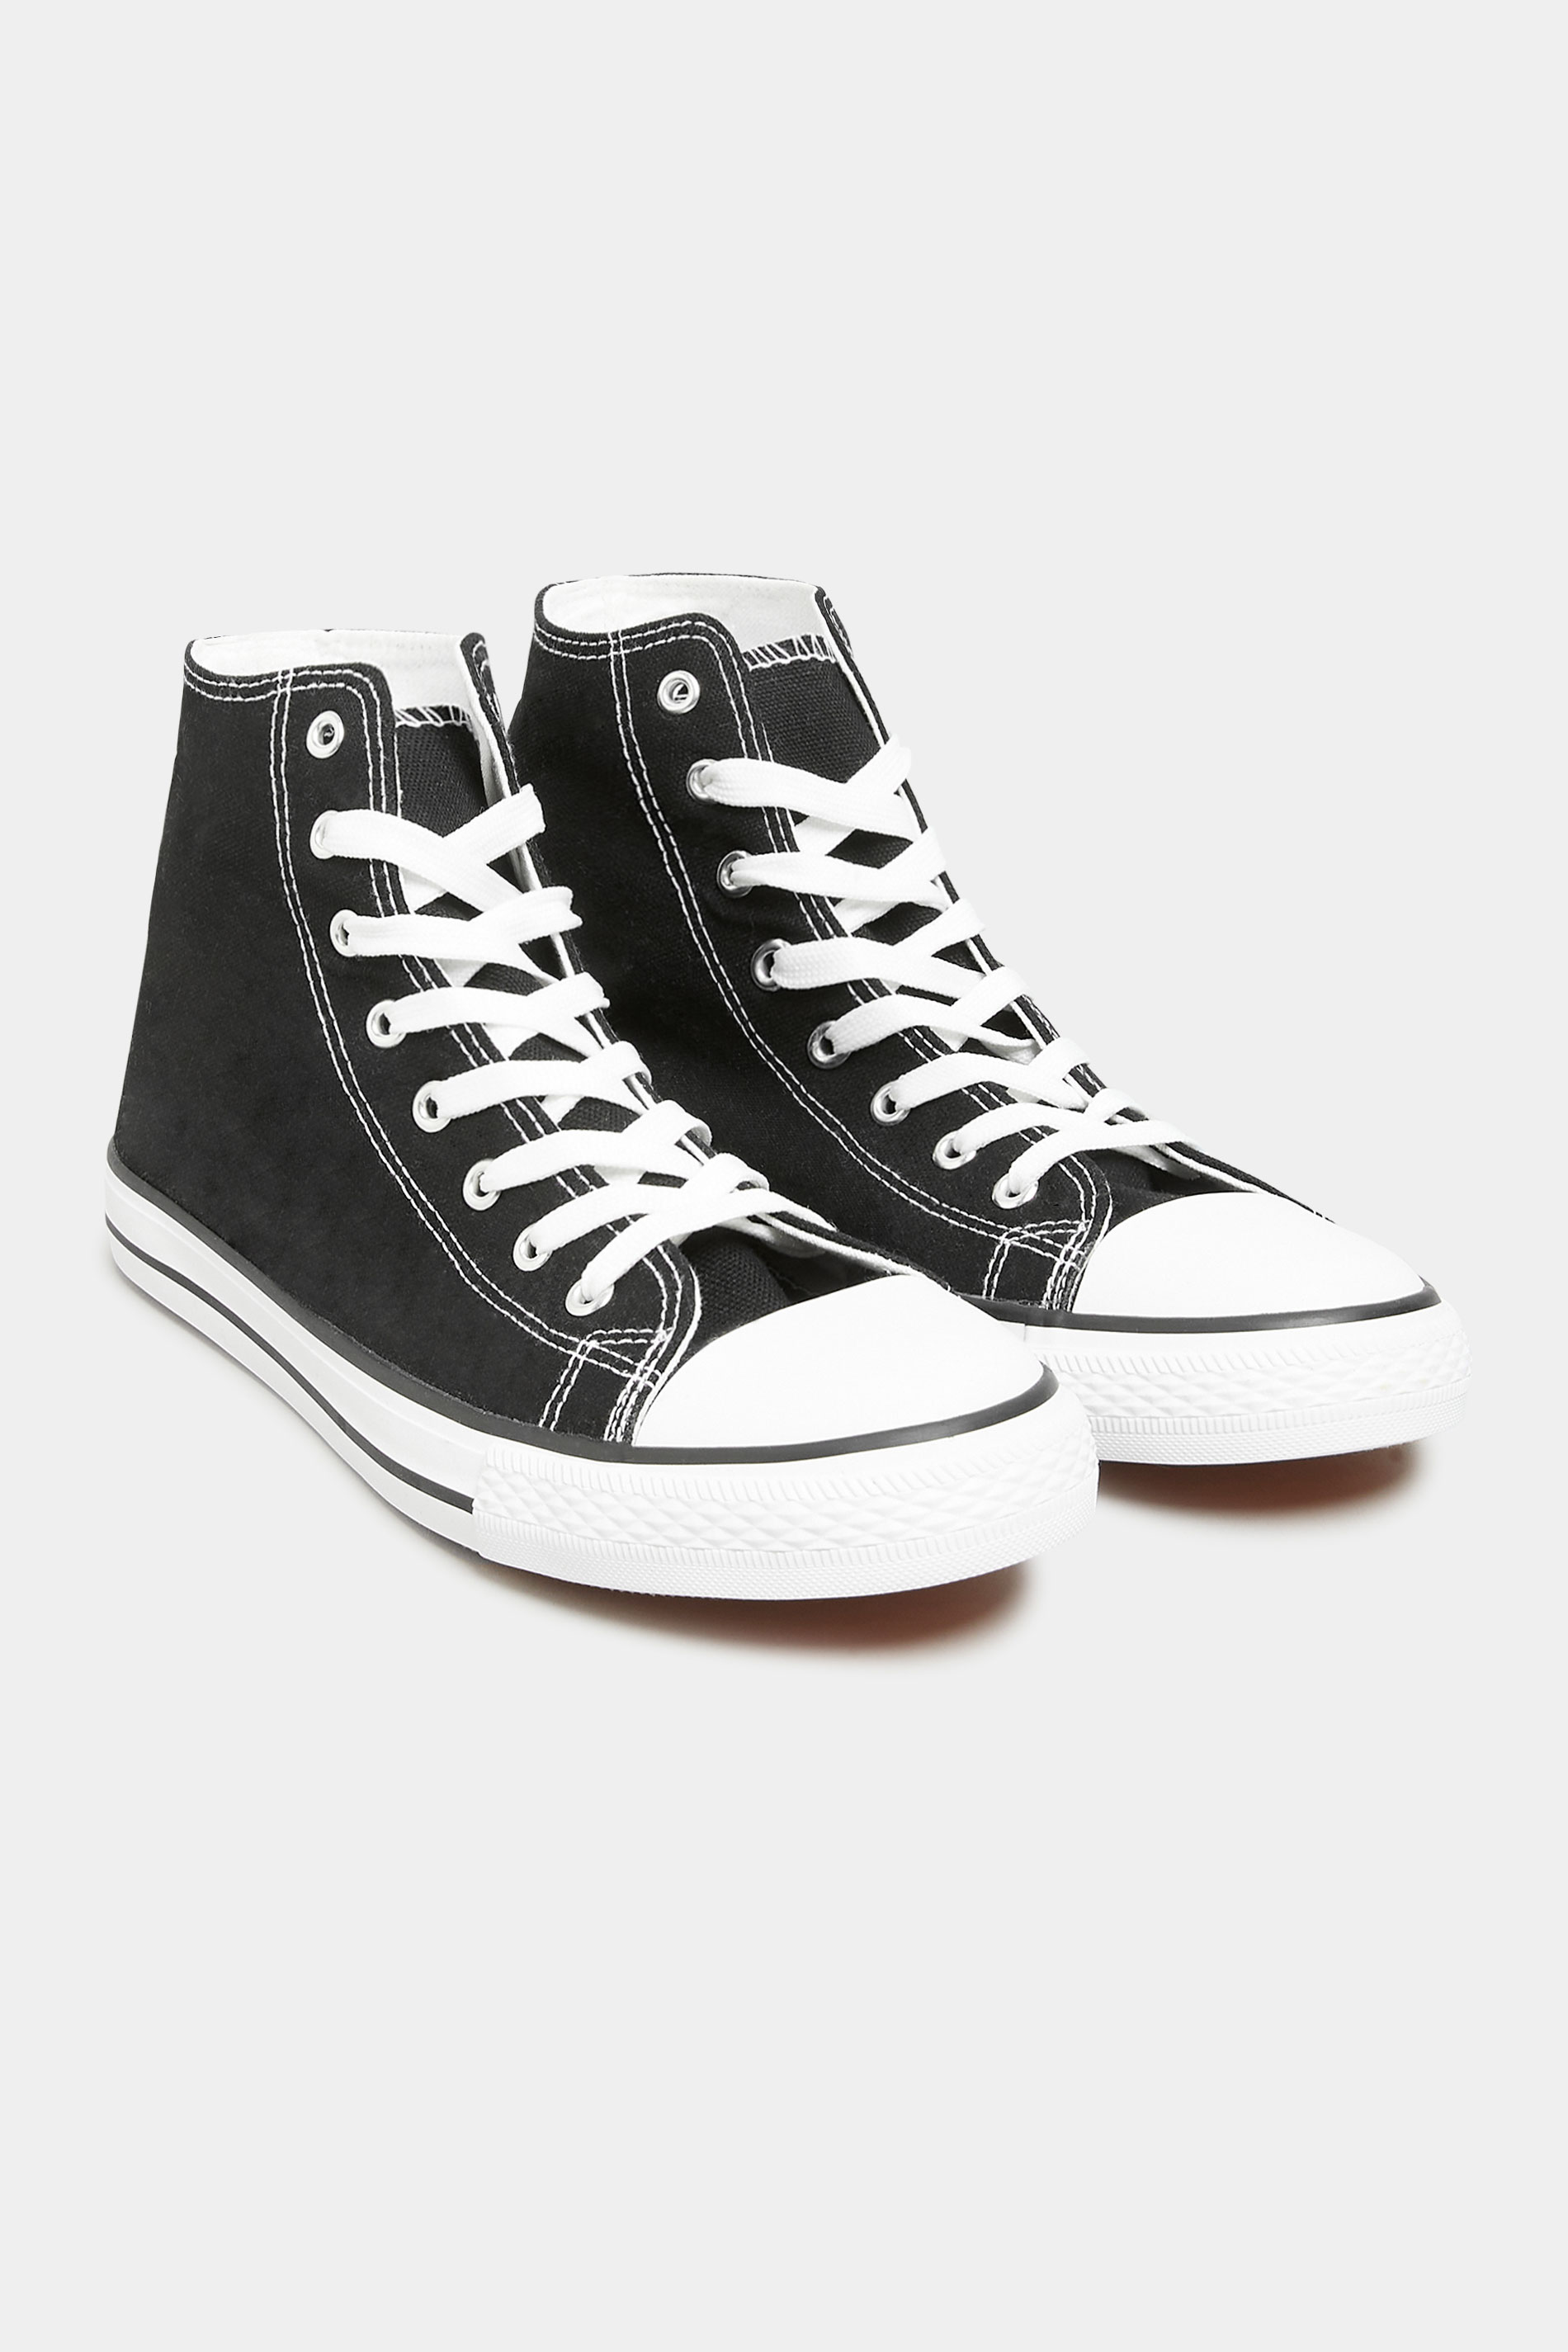 LTS Black Canvas High Top Trainers In Standard D Fit | Long Tall Sally